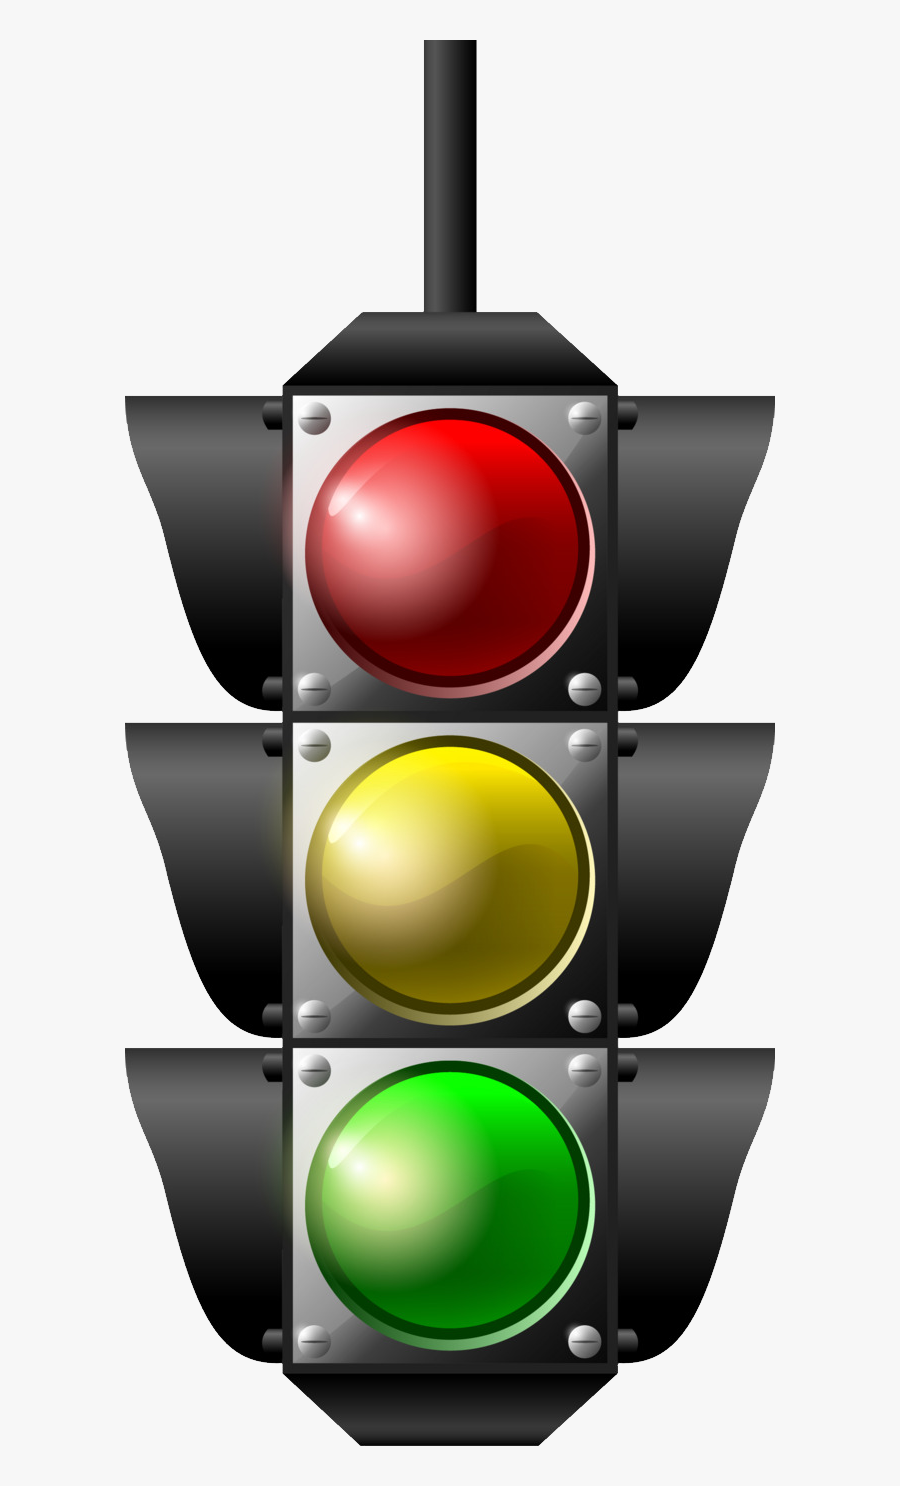 Hd Traffic Light Png, Download Png Image With Transparent - Traffic Light Logo Png, Transparent Clipart